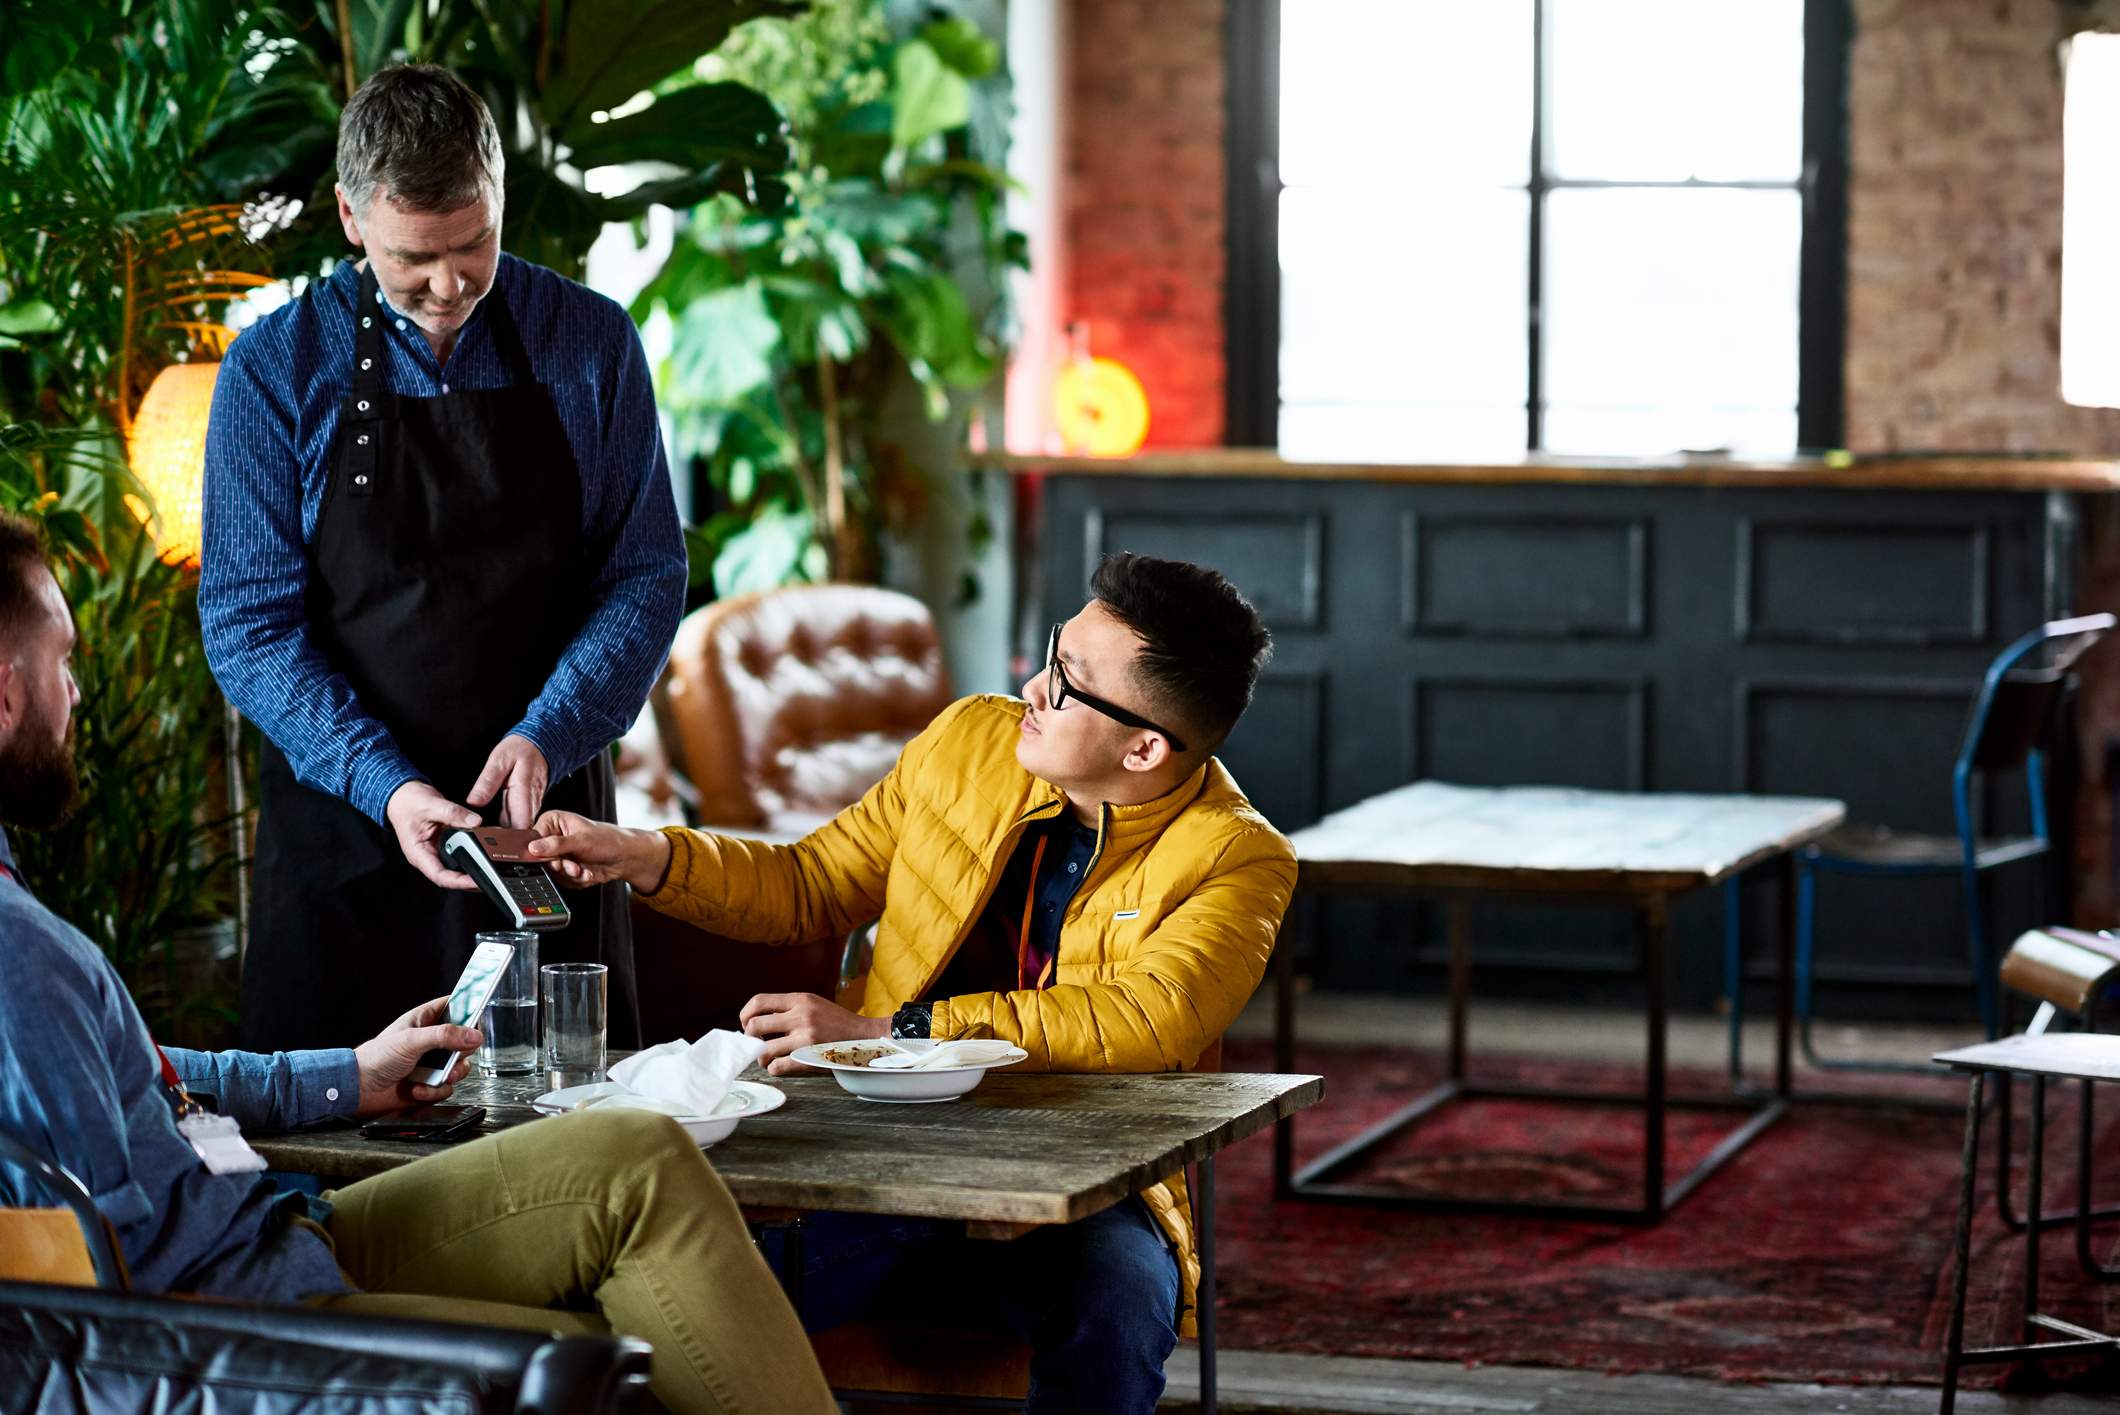 Image depicts a person in a yellow puffer jacket and black rimmed glasses utilizing a point-of-sale (POS) system to pay for a meal at a restaurant. A server wearing a blue button down and black apron is holding it out to the guest. The other diner at the table is looking at their phone. 